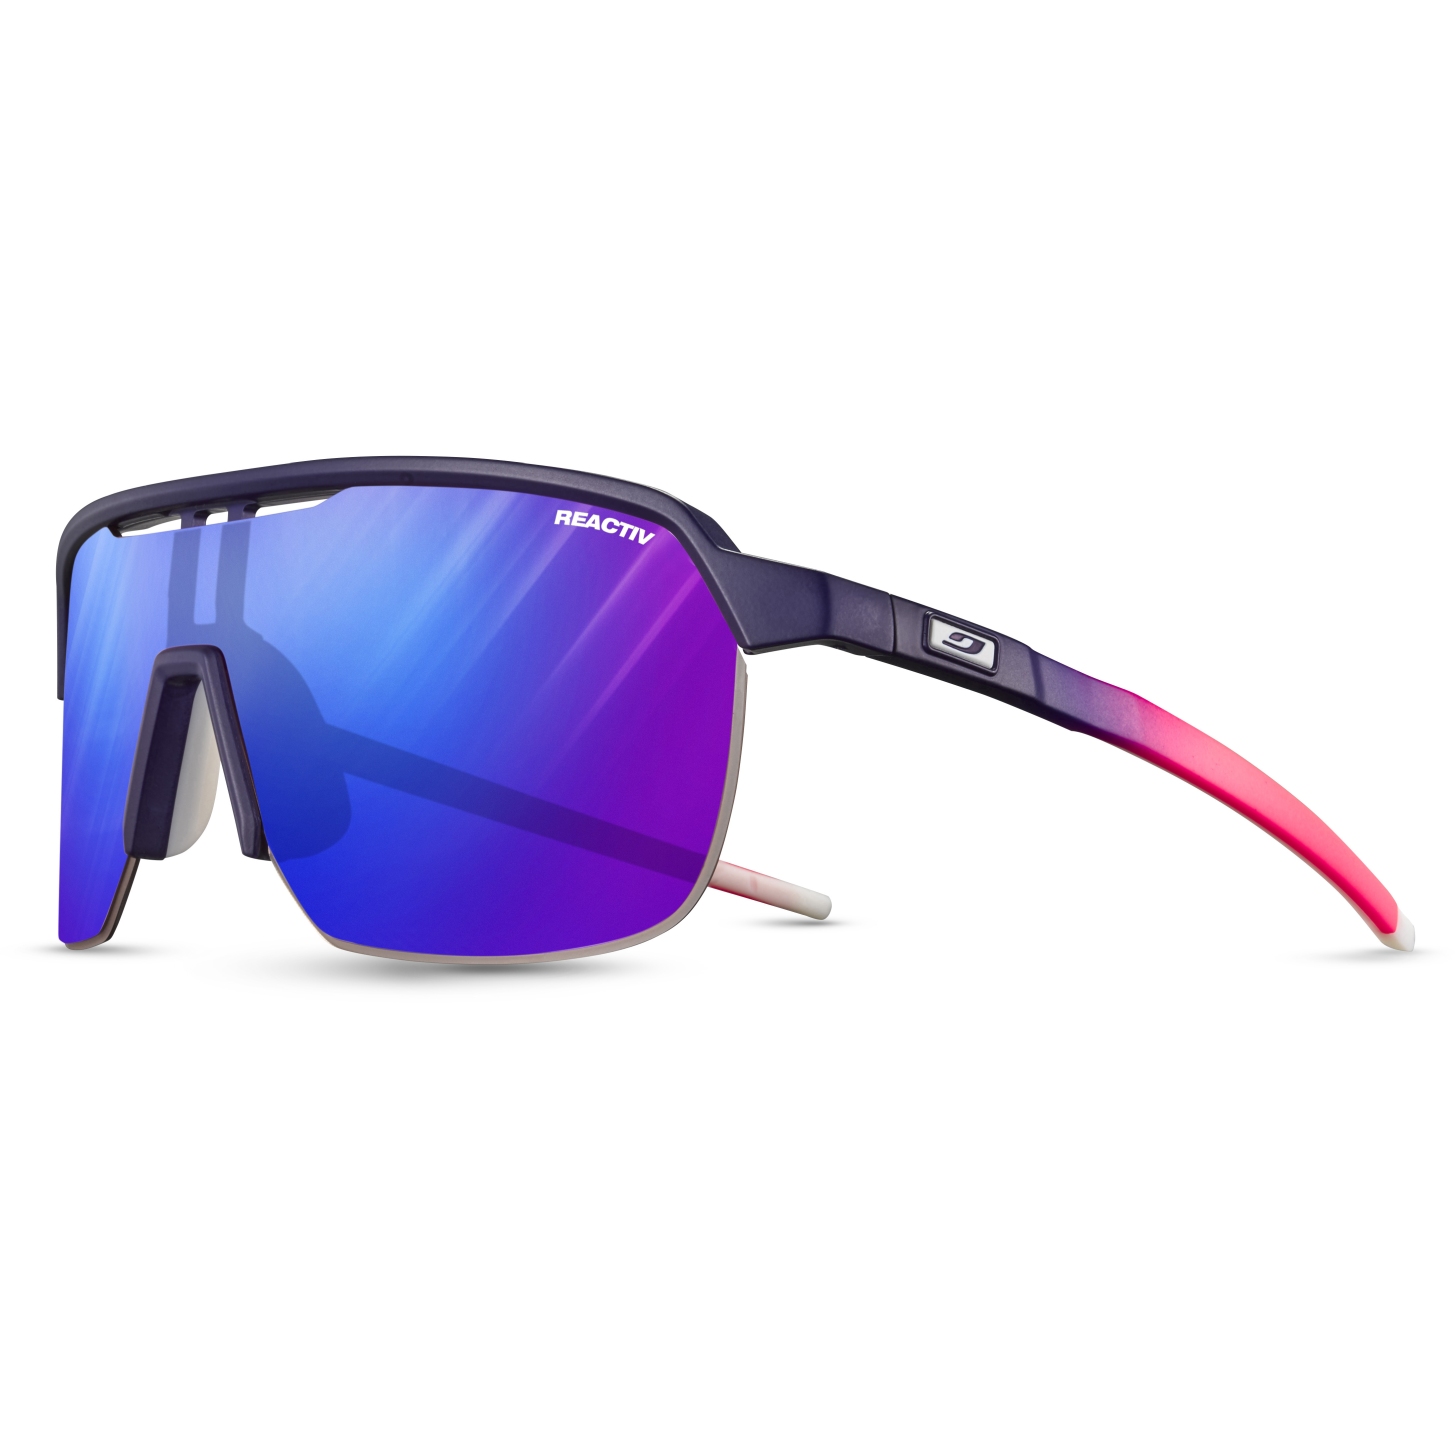 Picture of Julbo Frequency Reactiv Sunglasses - Violet Pink / Multilayer Blue 1-3 High Contrast